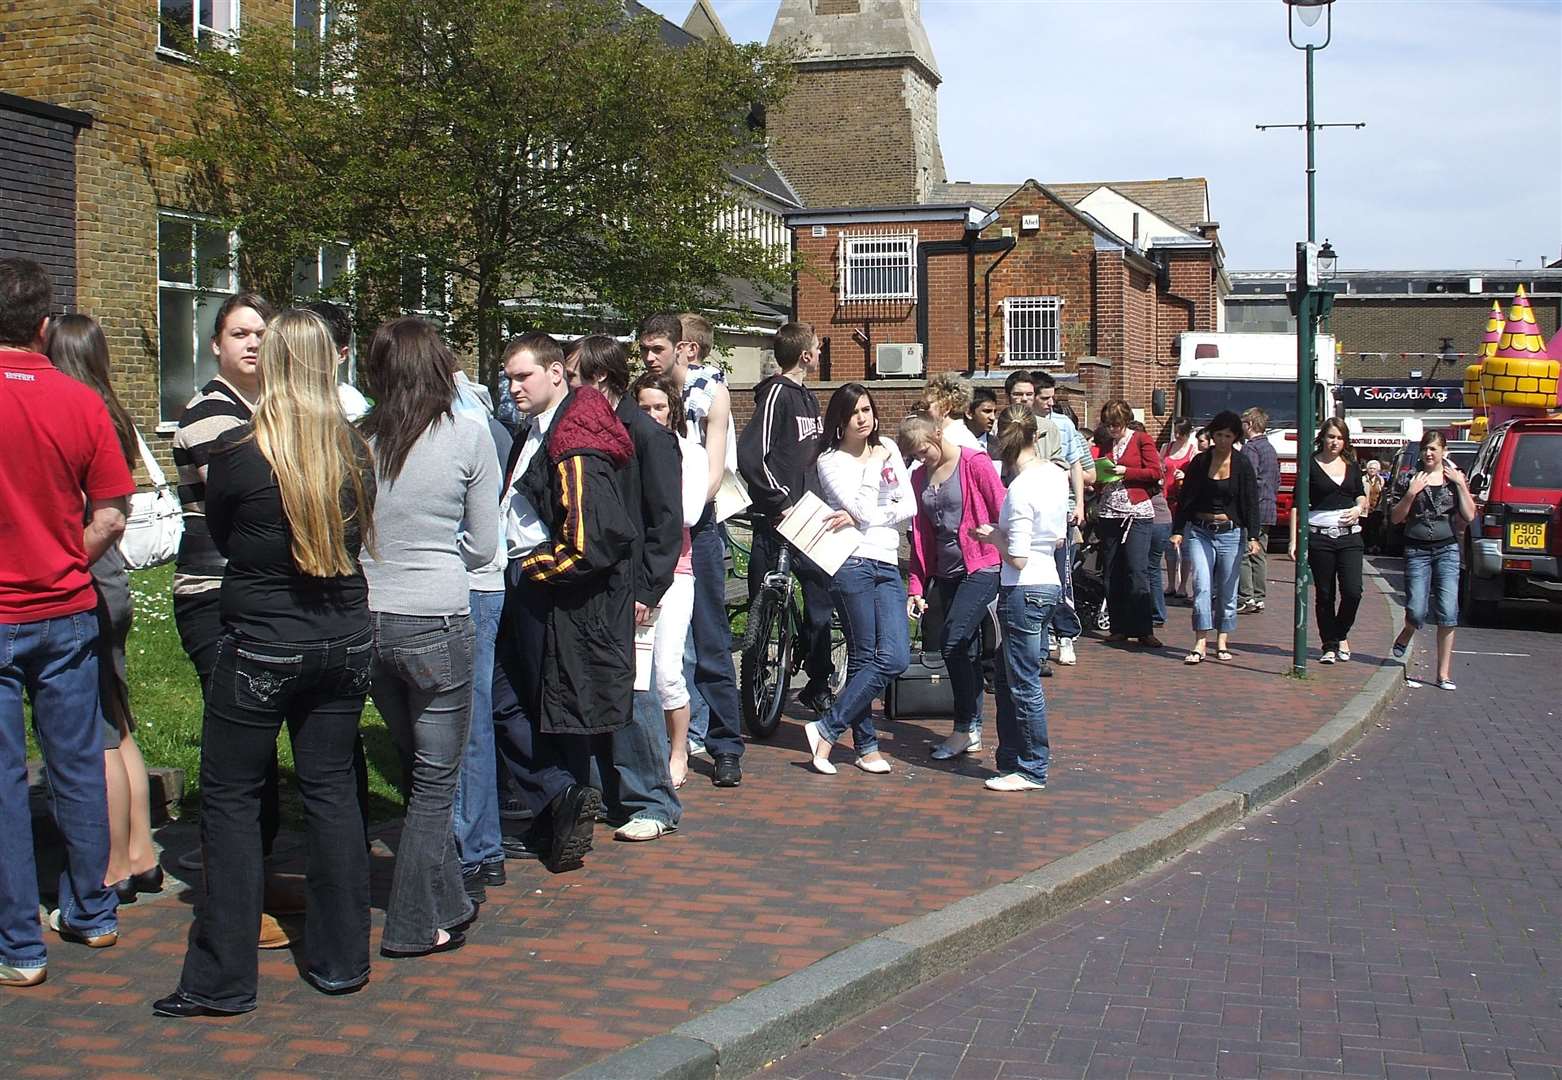 Today, most queues are for folk applying for jobs, foodbanks or when a new Poundland opens (inexplicably)